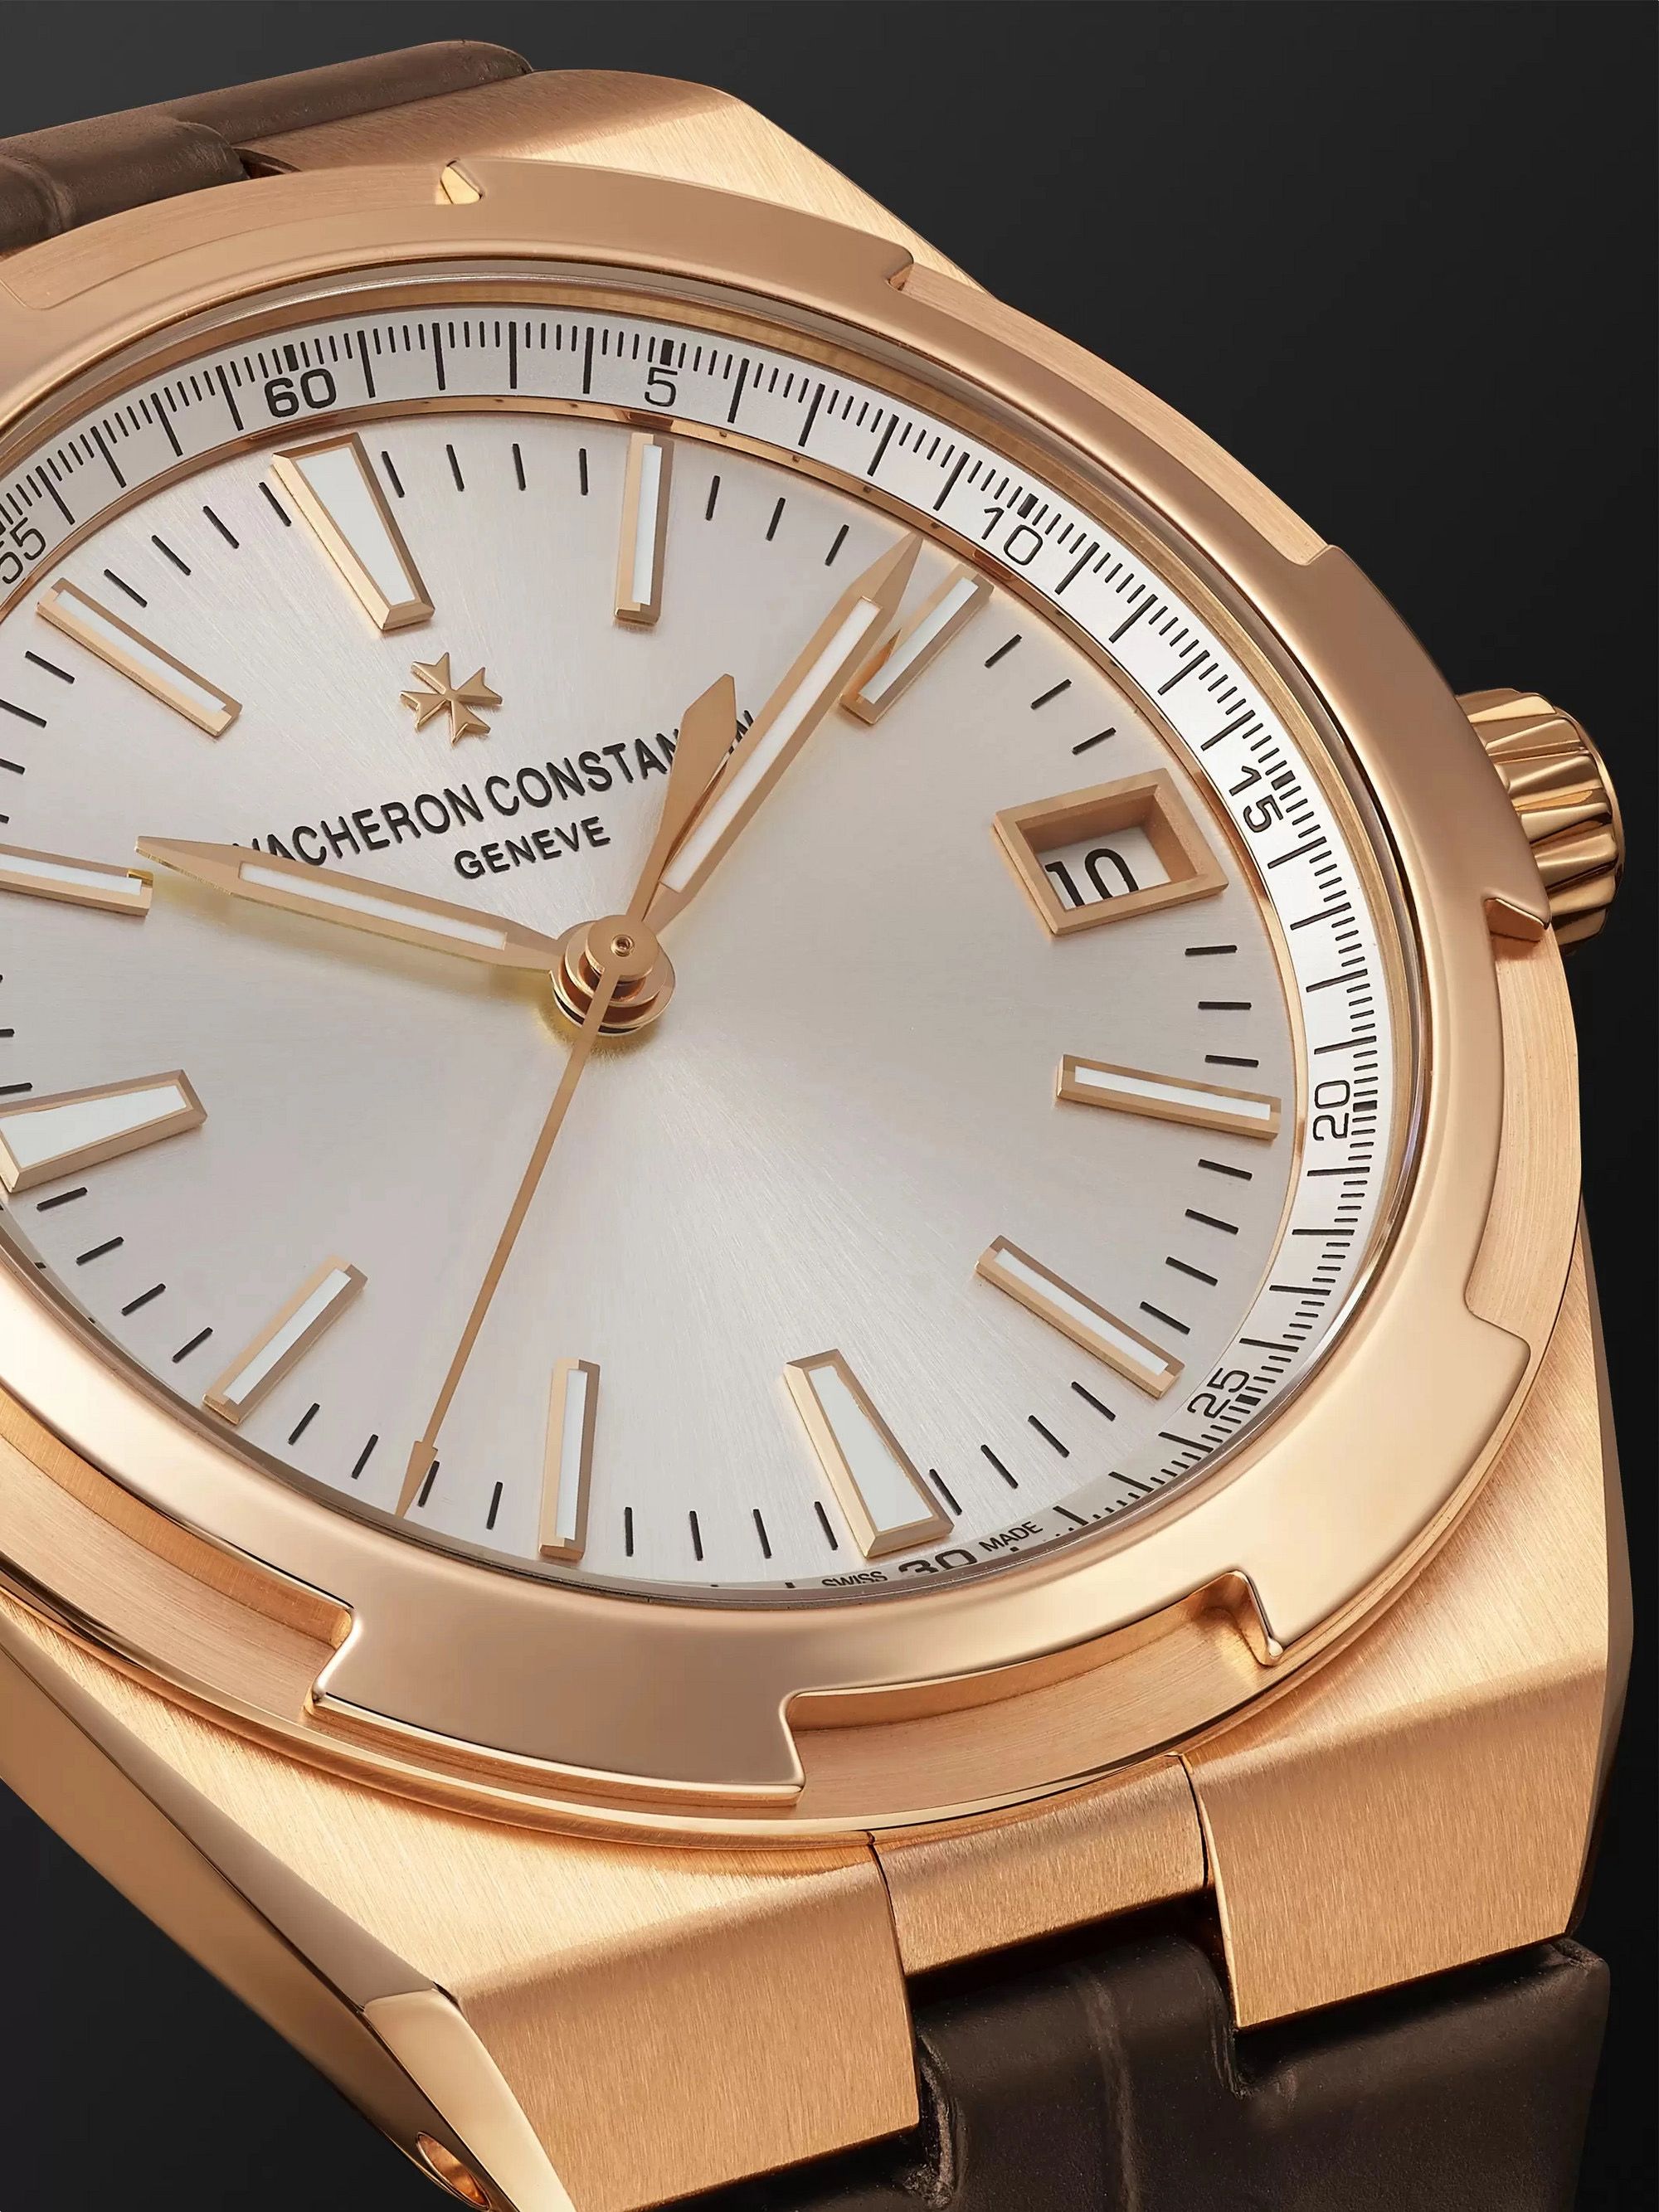 VACHERON CONSTANTIN Overseas Automatic 41mm 18-Karat Pink Gold and Leather Watch, Ref. No. 4500V/000R-B127